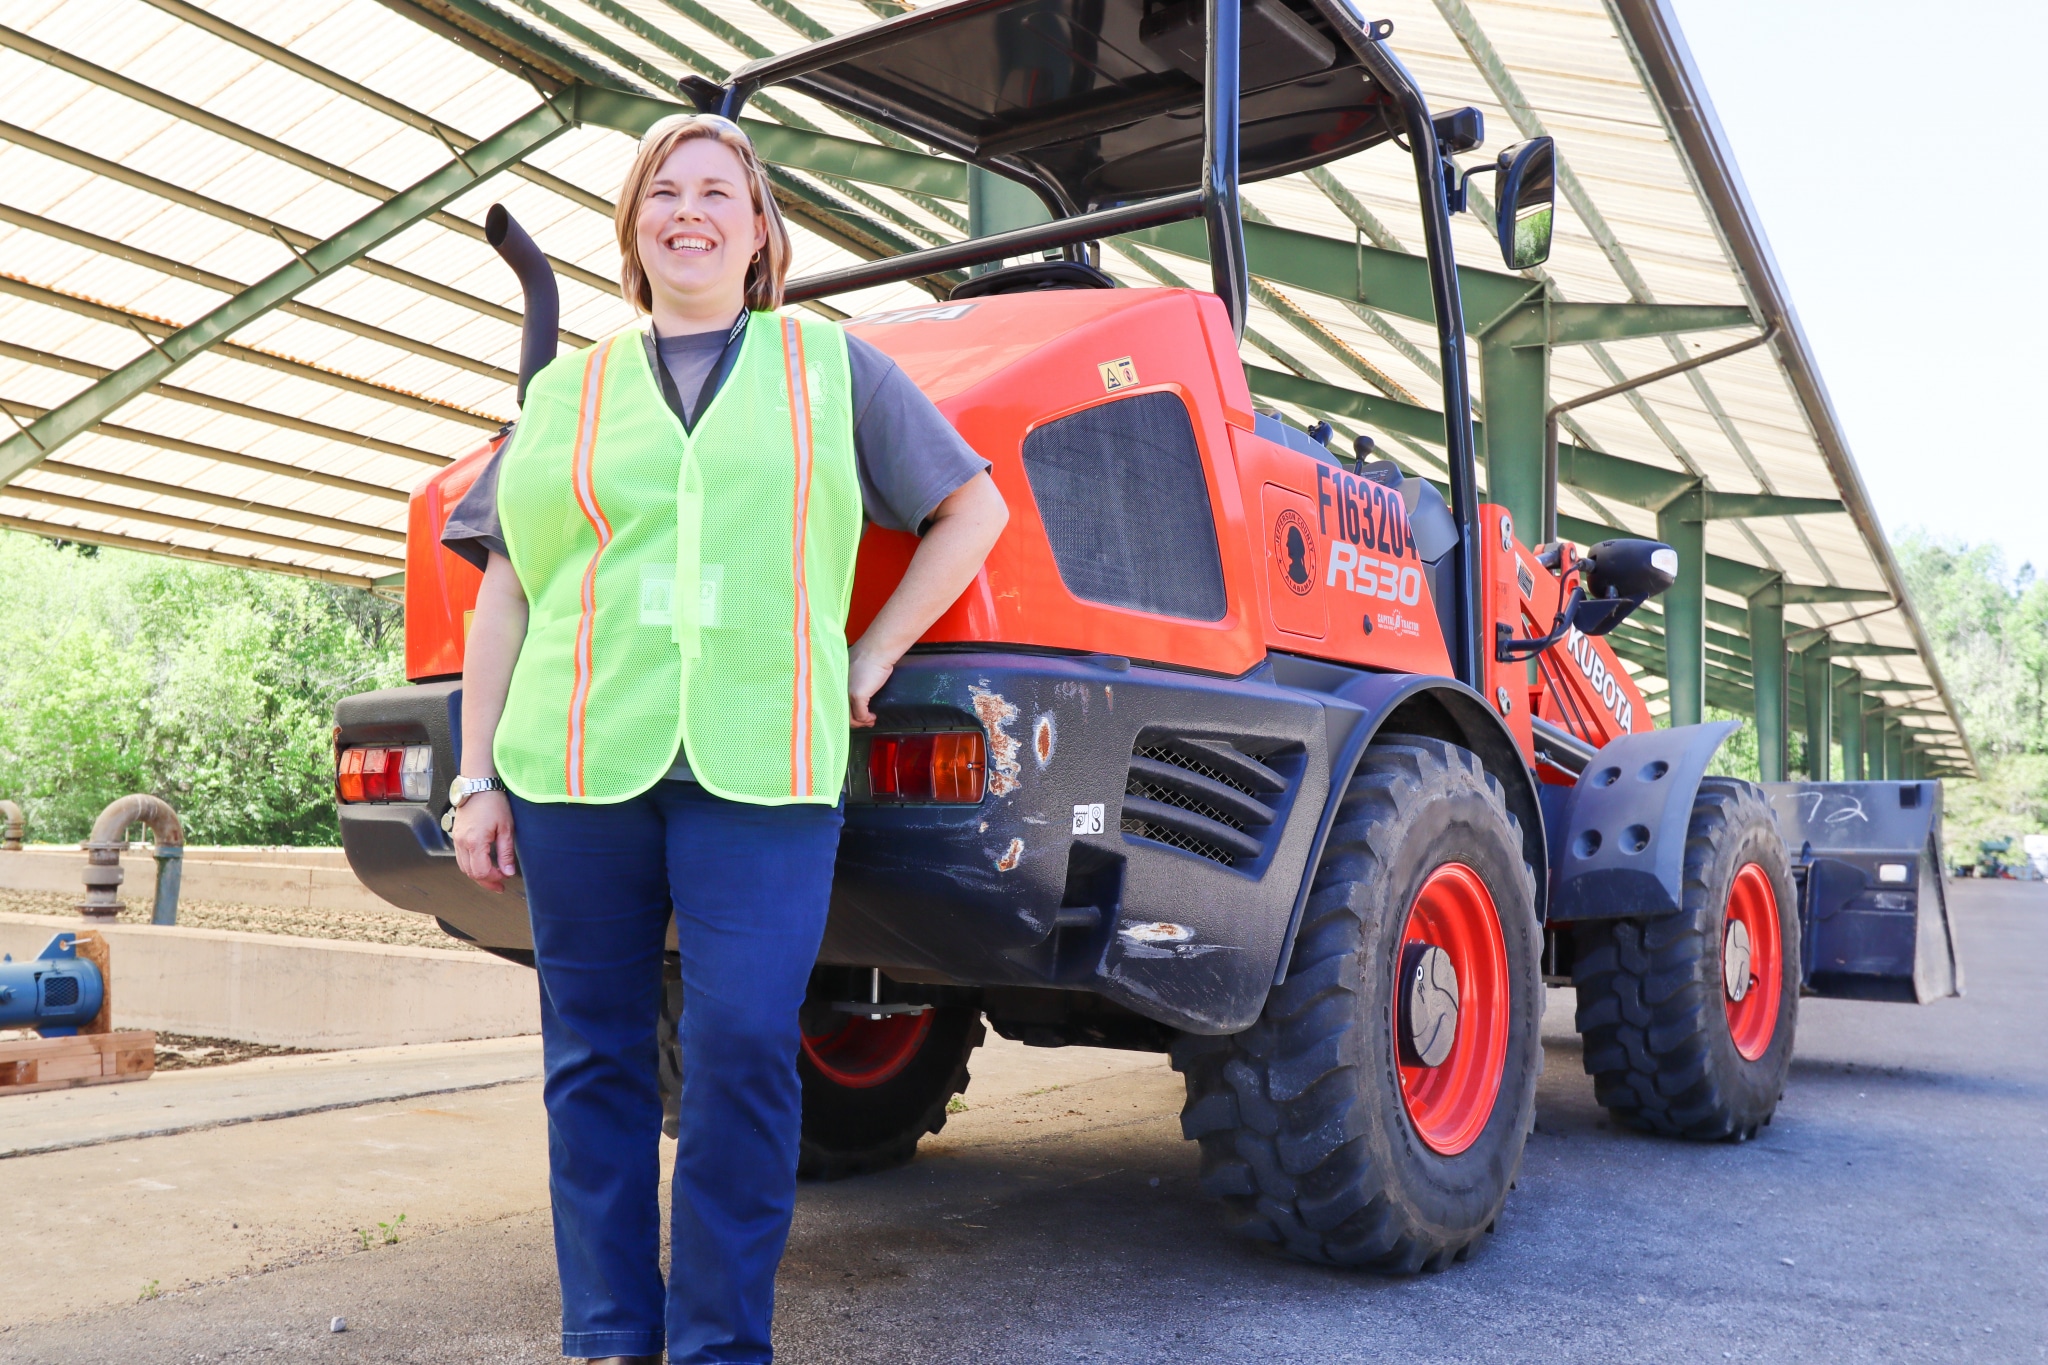 Meet Brenda White, former retail worker and current apprentice at Jefferson County’s Environmental Services Department. Photo by Christine Hull for Bham Now